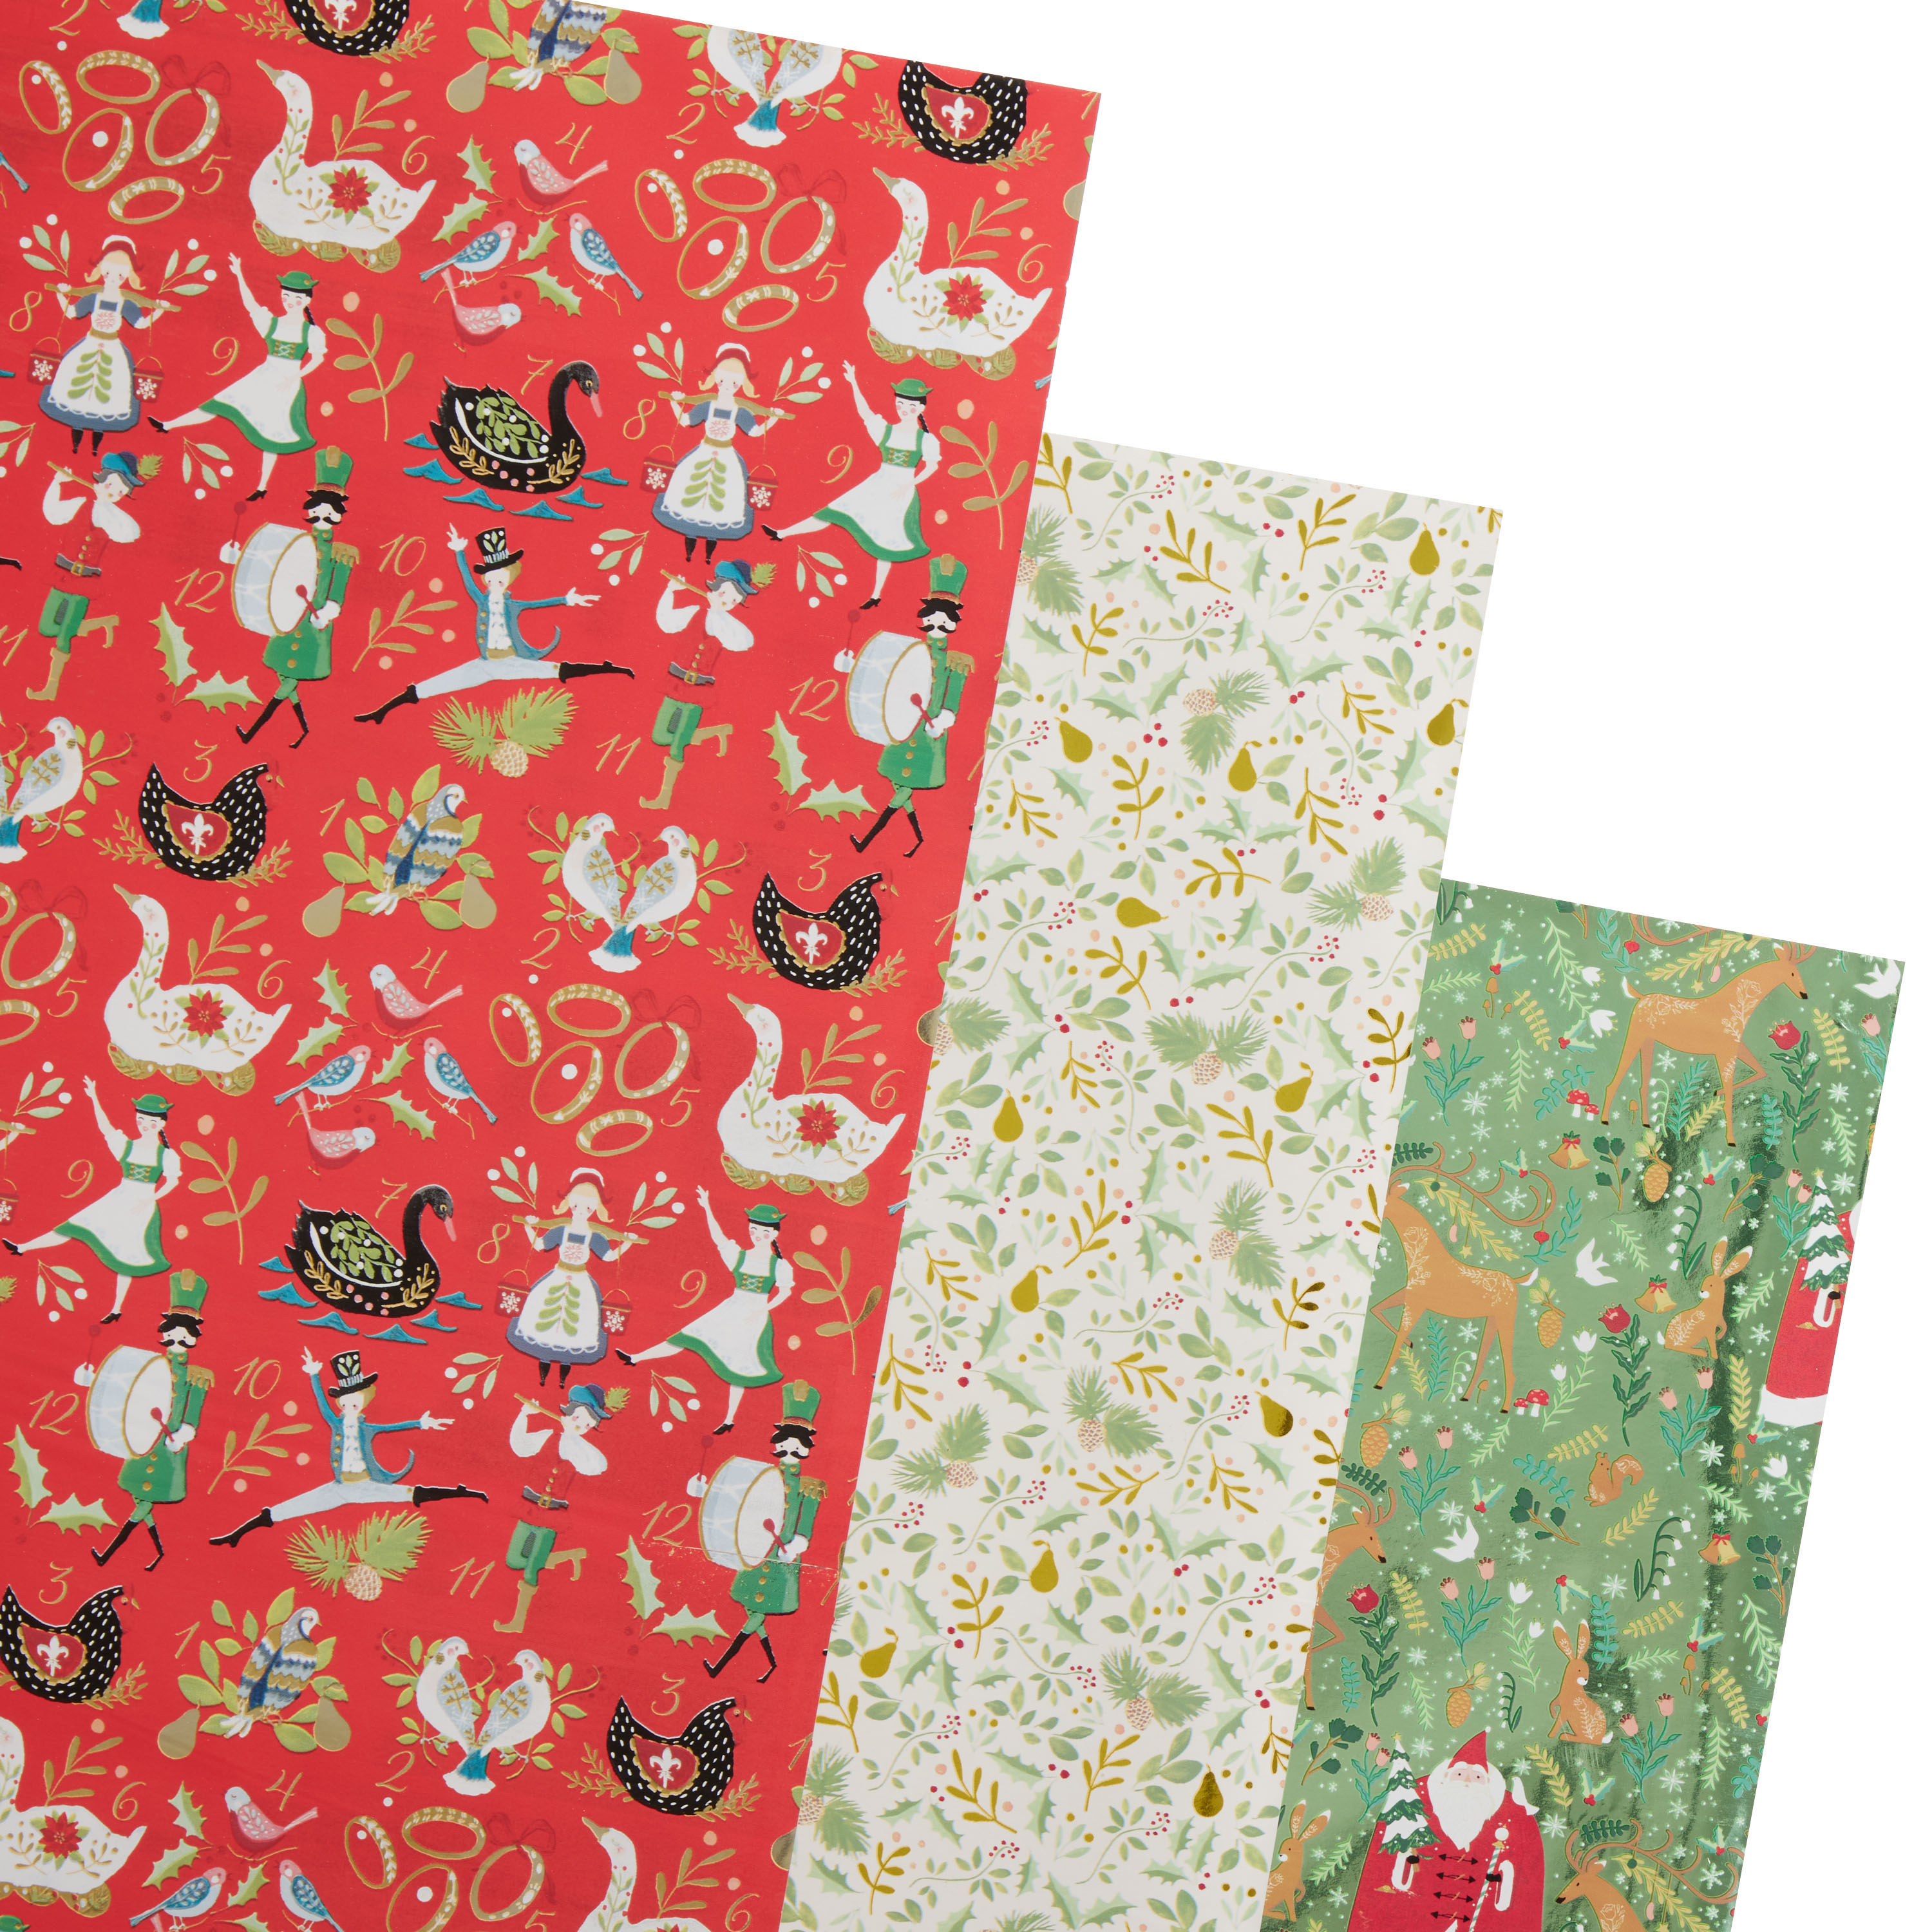 Gift Wrap Patterned Liberty Bloom Tissue Paper Pack of 6 Sheets 